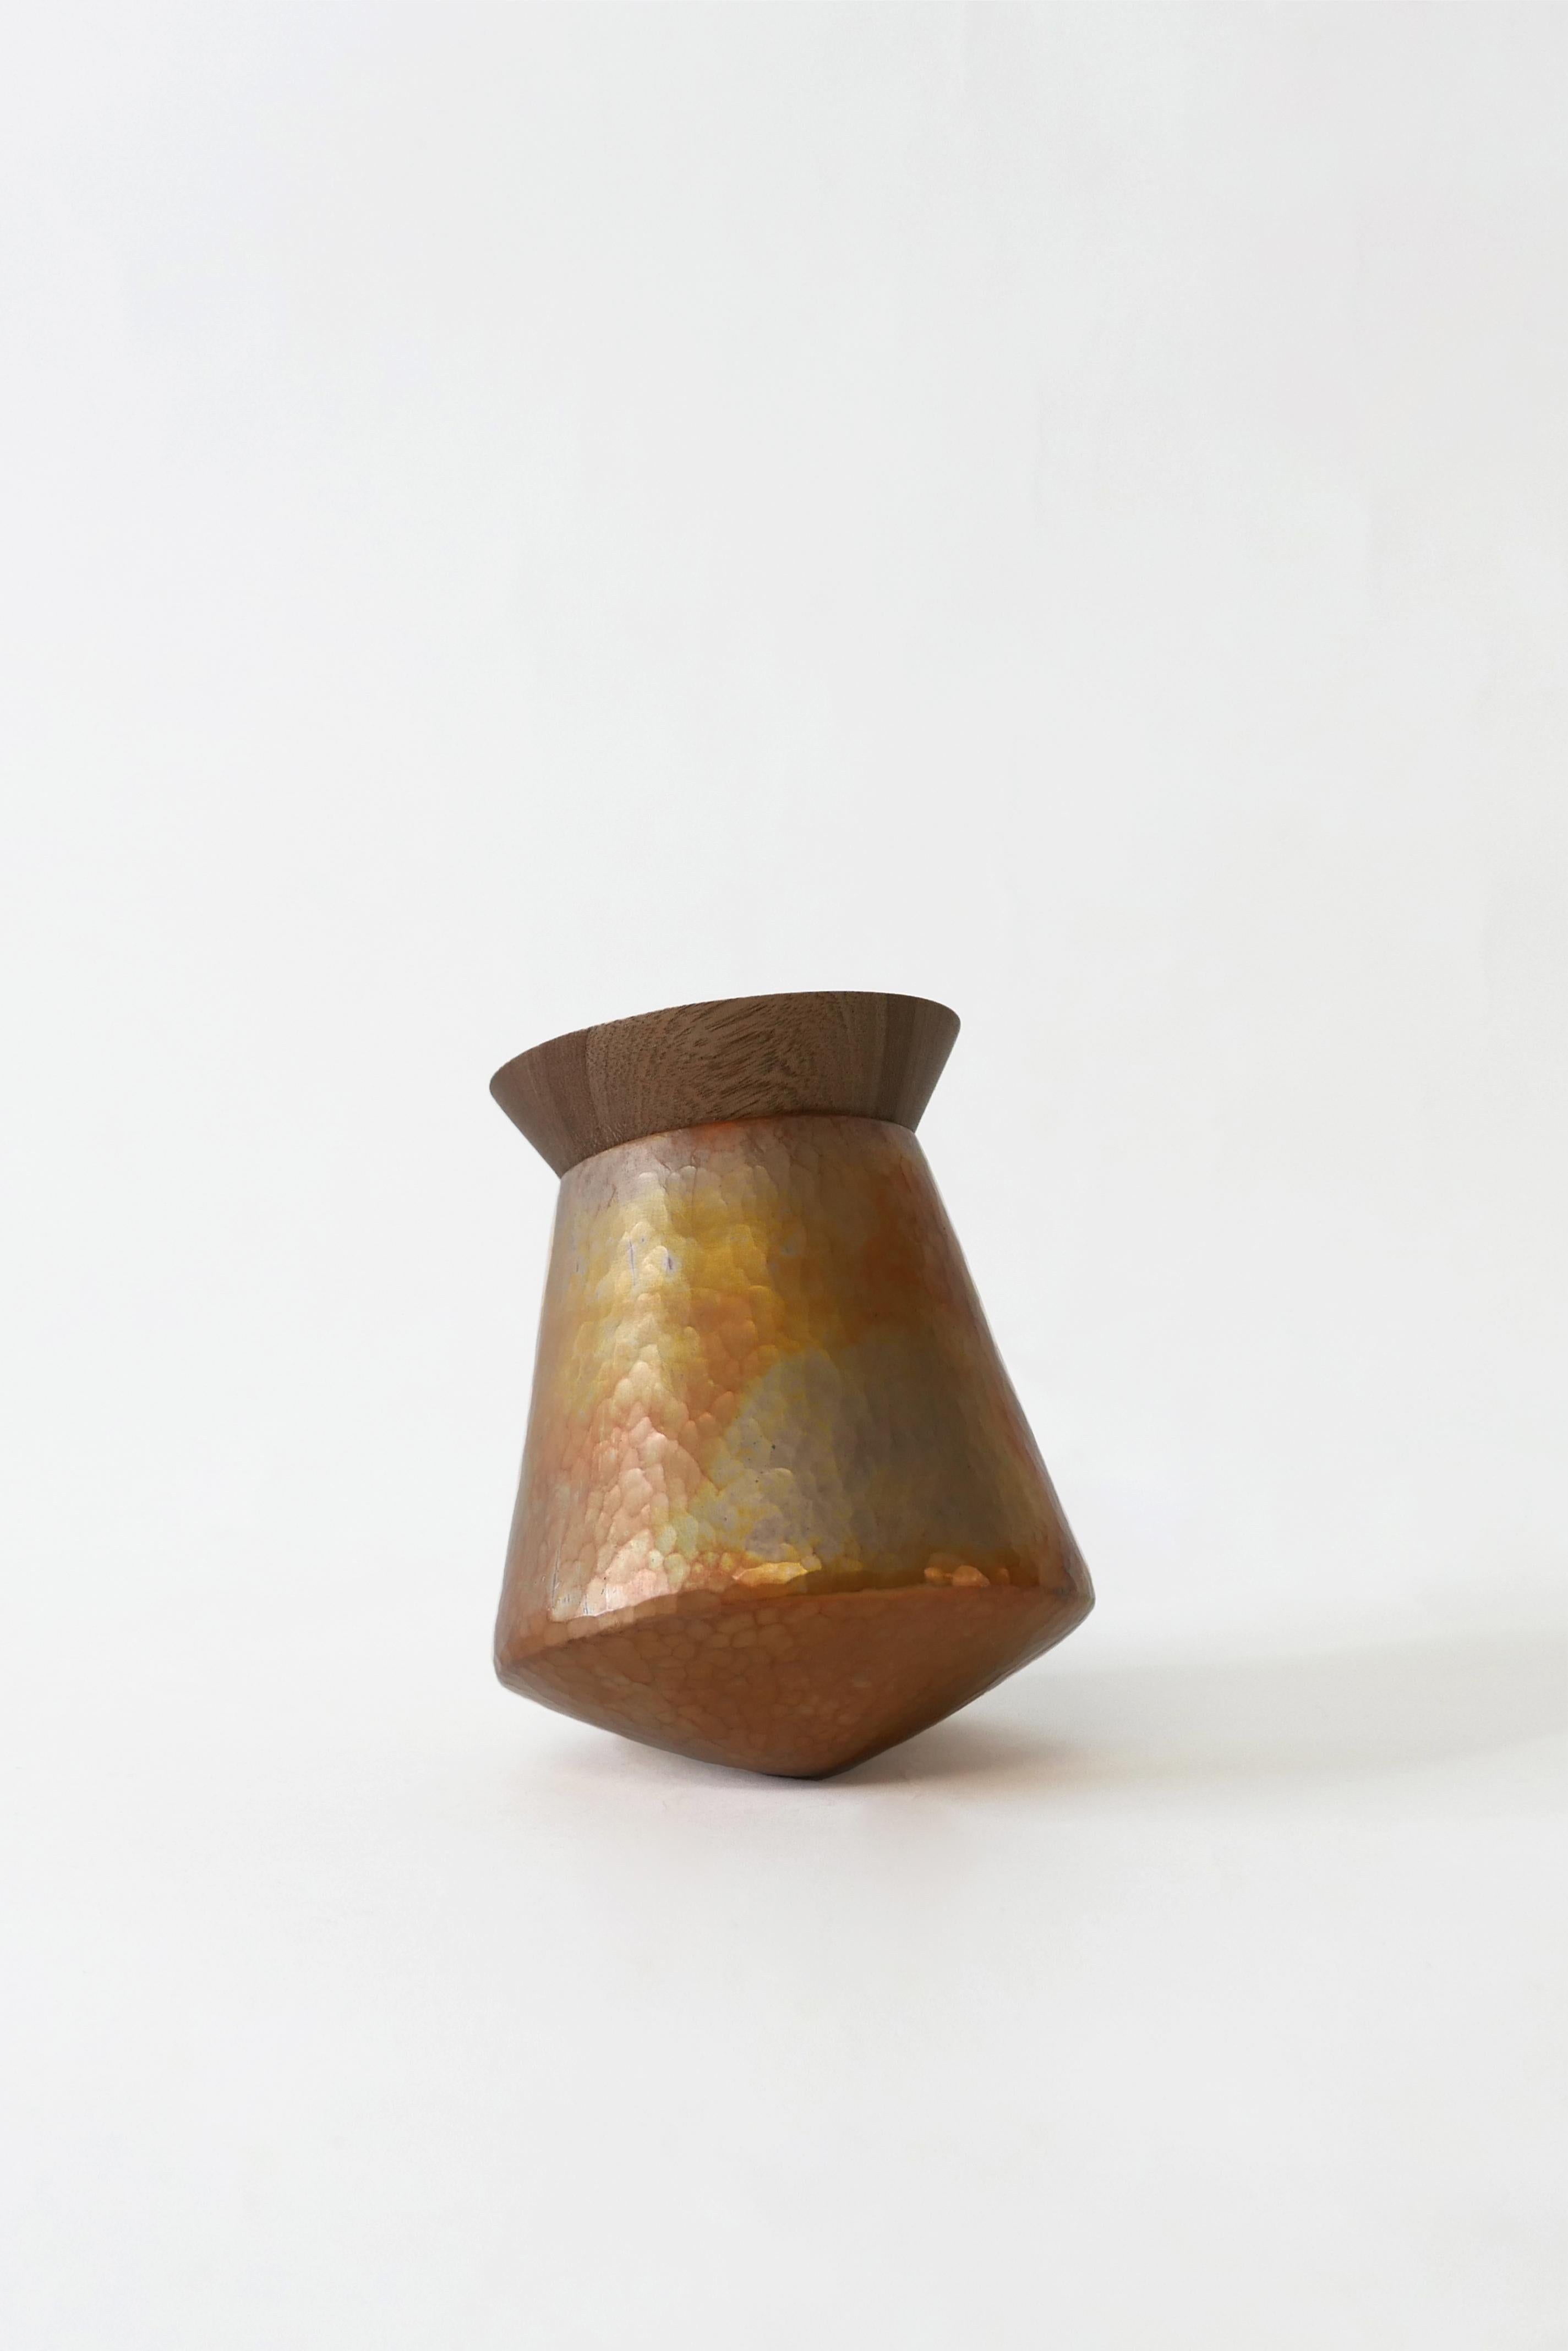 Balance between copper and wood. Flashes of light and movement come together to give life to the cointainers dancing to the sound of their own body and leaving a trace of their reflections.
The Vaivén containers are the ideal accessory to give